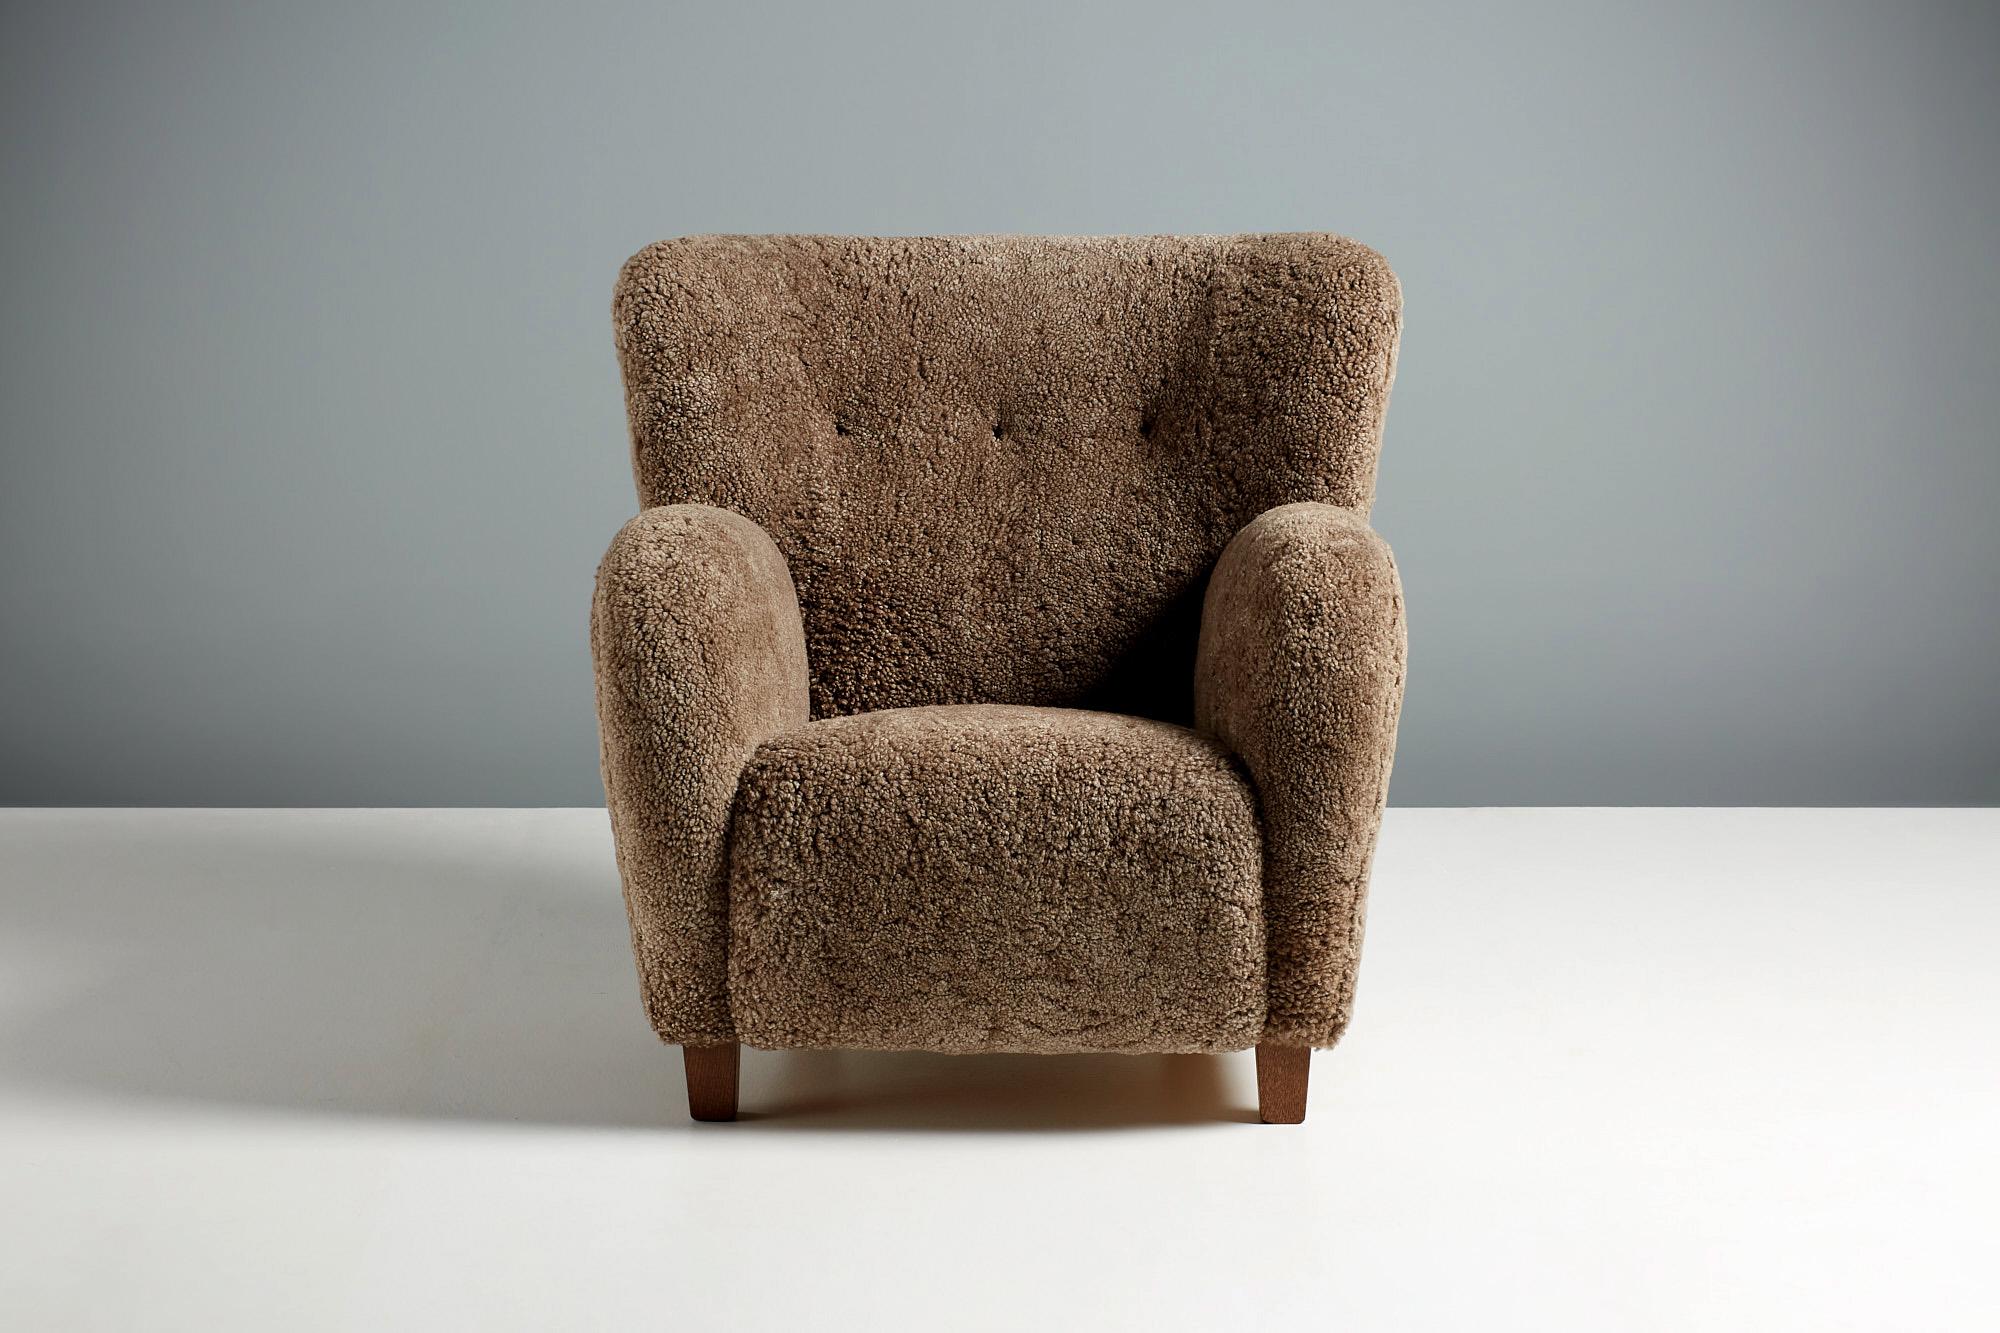 Dagmar Karu armchair & ottoman in brown shearling with fumed oak legs. 

These armchairs are handmade to order at our workshops in England. The chair legs are available in oiled oak, fumed oak or walnut. The chairs are upholstered in luxurious